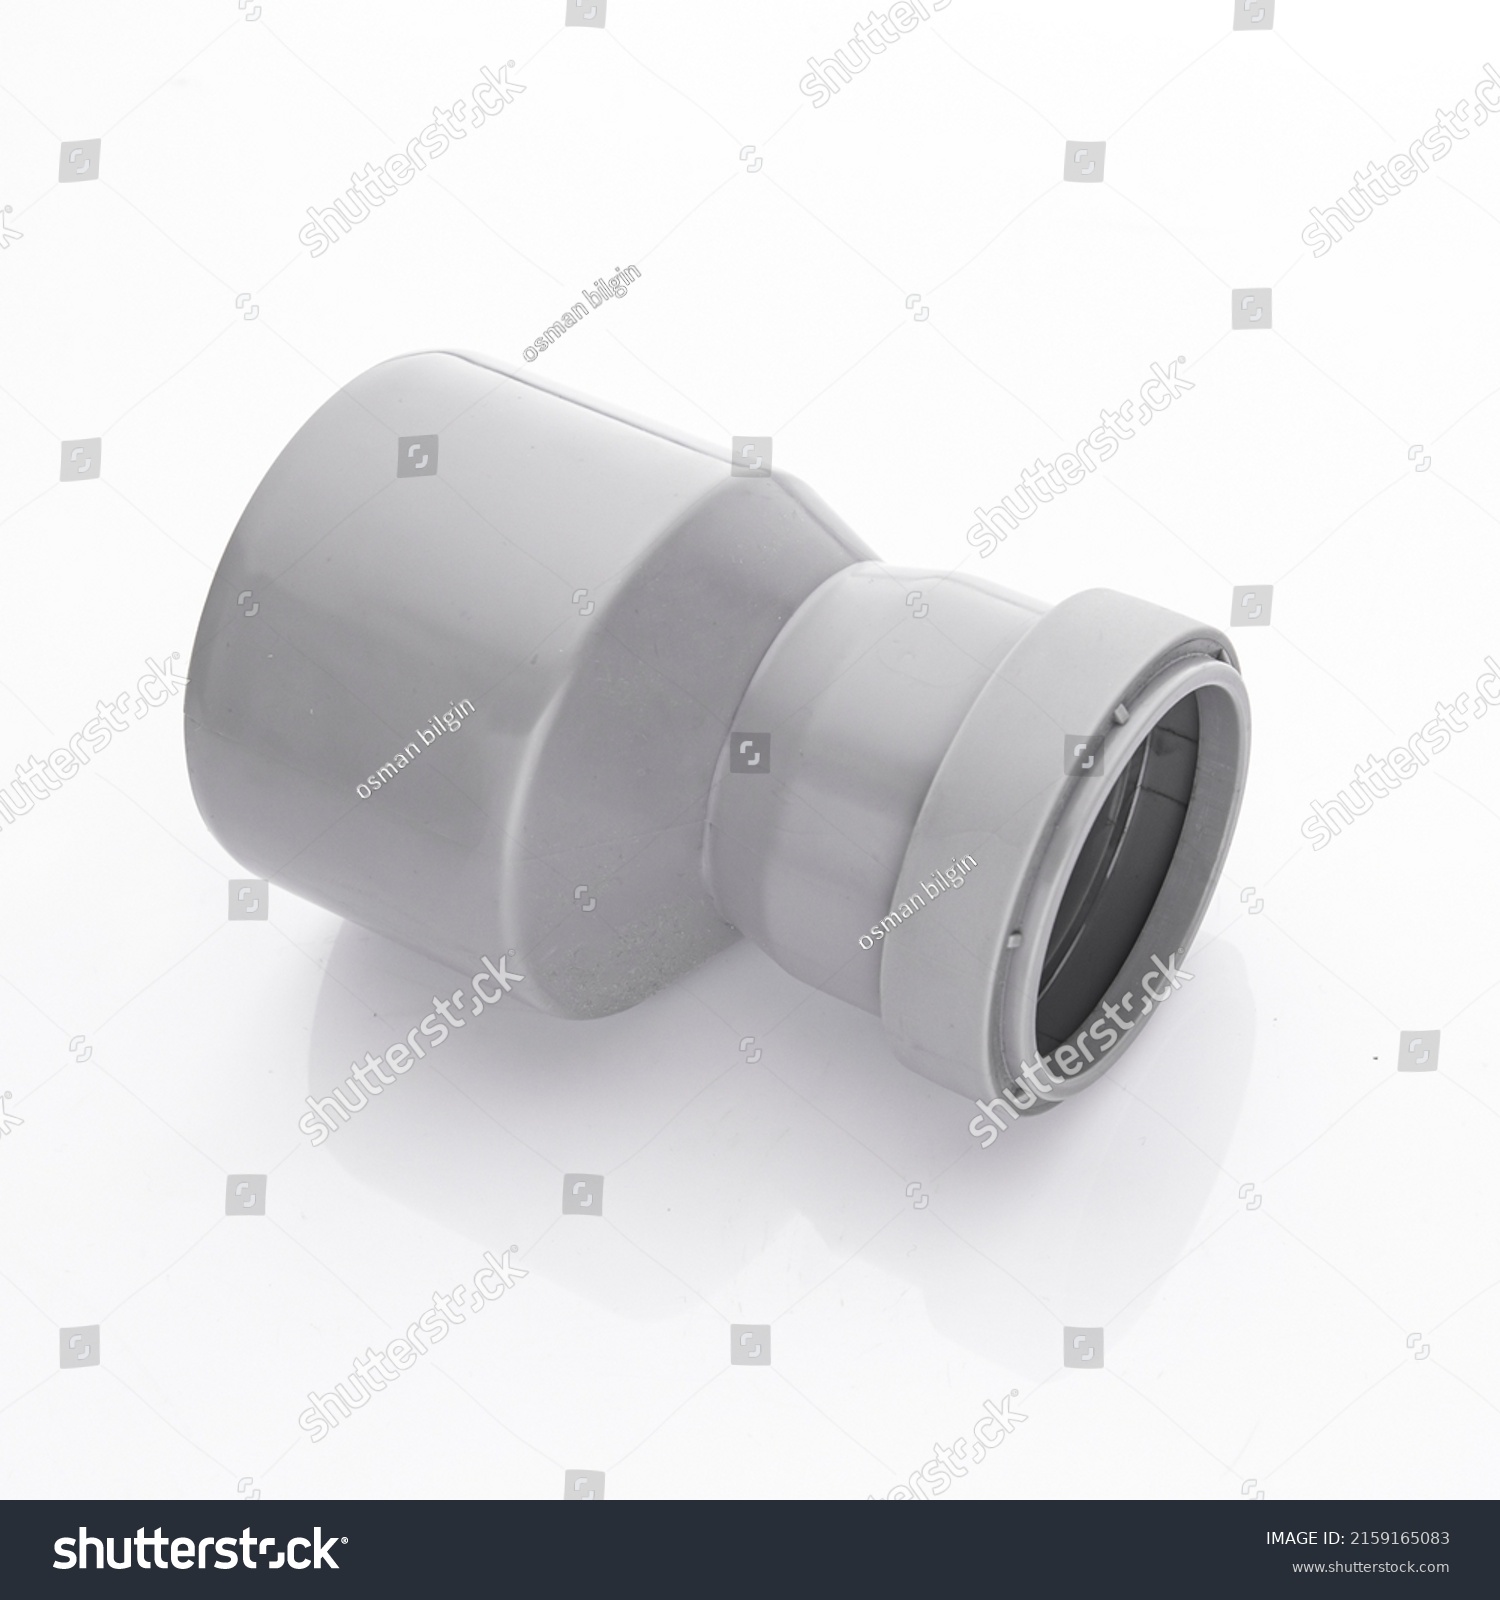 Stock Photo Drain Pipe Or Sewer Under The Kitchen Sink Includes Pvc Plastic Pipe And Flexible Supply Pipe 2159165083 